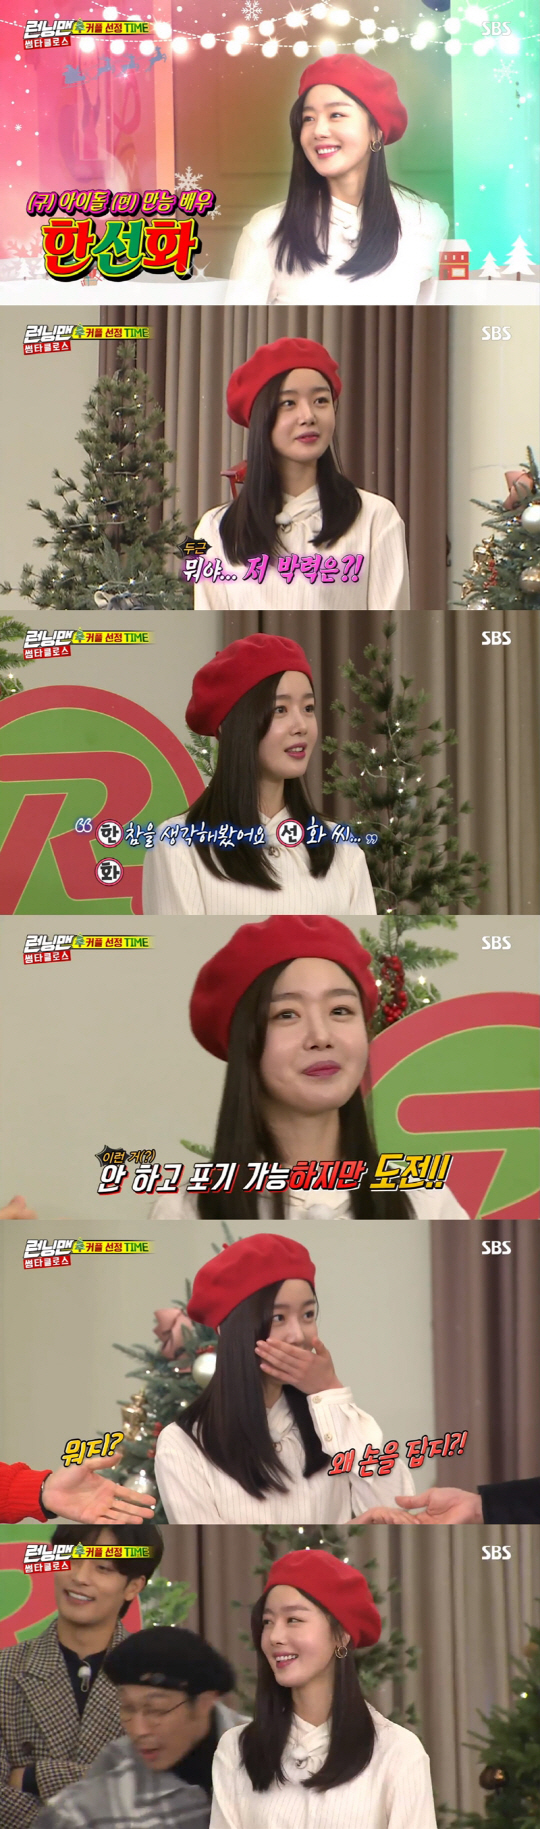 <p>The last 23 days broadcast SBS TV Running ManChristmas anniversary thumb Satan Claus special unfolds, Han Sunhwa as a guest starring.</p><p>Han Sunhwa is a couple chases this as much as even peek-a-Boo bear went. Among these Lee Kwang-soo and a couple were, but eventually the night or back to even peek-a-Boo to my Princess and first appeared from the chaos that engulfed in.</p><p>Han Sunhwa is a mint one with open as a partner, Lee Kwang-soo, a taxi to the guest, but with divergence time got. The sudden situation was, but Lee Kwang-soo of the mind to hold on to the Lee Kwang-soo name the challenge. Confident the to this was Han Sunhwa is the last letter in beep clean and MC Yoo Jae-Suk to shoot archery or just take a laugh.</p><p>Therefore, the Solo became Han Sunhwa is again paired Peek-A-Boo bear went, remaining a partner of Yoo Jae-Suk chose himself to you for the new pair Peek-A-Boo to ask wits to exert for men the other for toys and showed them.</p><p>So long time art appeared in the beginning a strong impact to the left Han Sunhwa next week in earnest and unfolds in the couples race on any active show but there are many expectations.</p><p>Meanwhile, Han Sunhwa is coming 29, 12 at night, to be broadcast in tvN short drama drama stage 2019 - Good - by my life insurance - find out.</p>